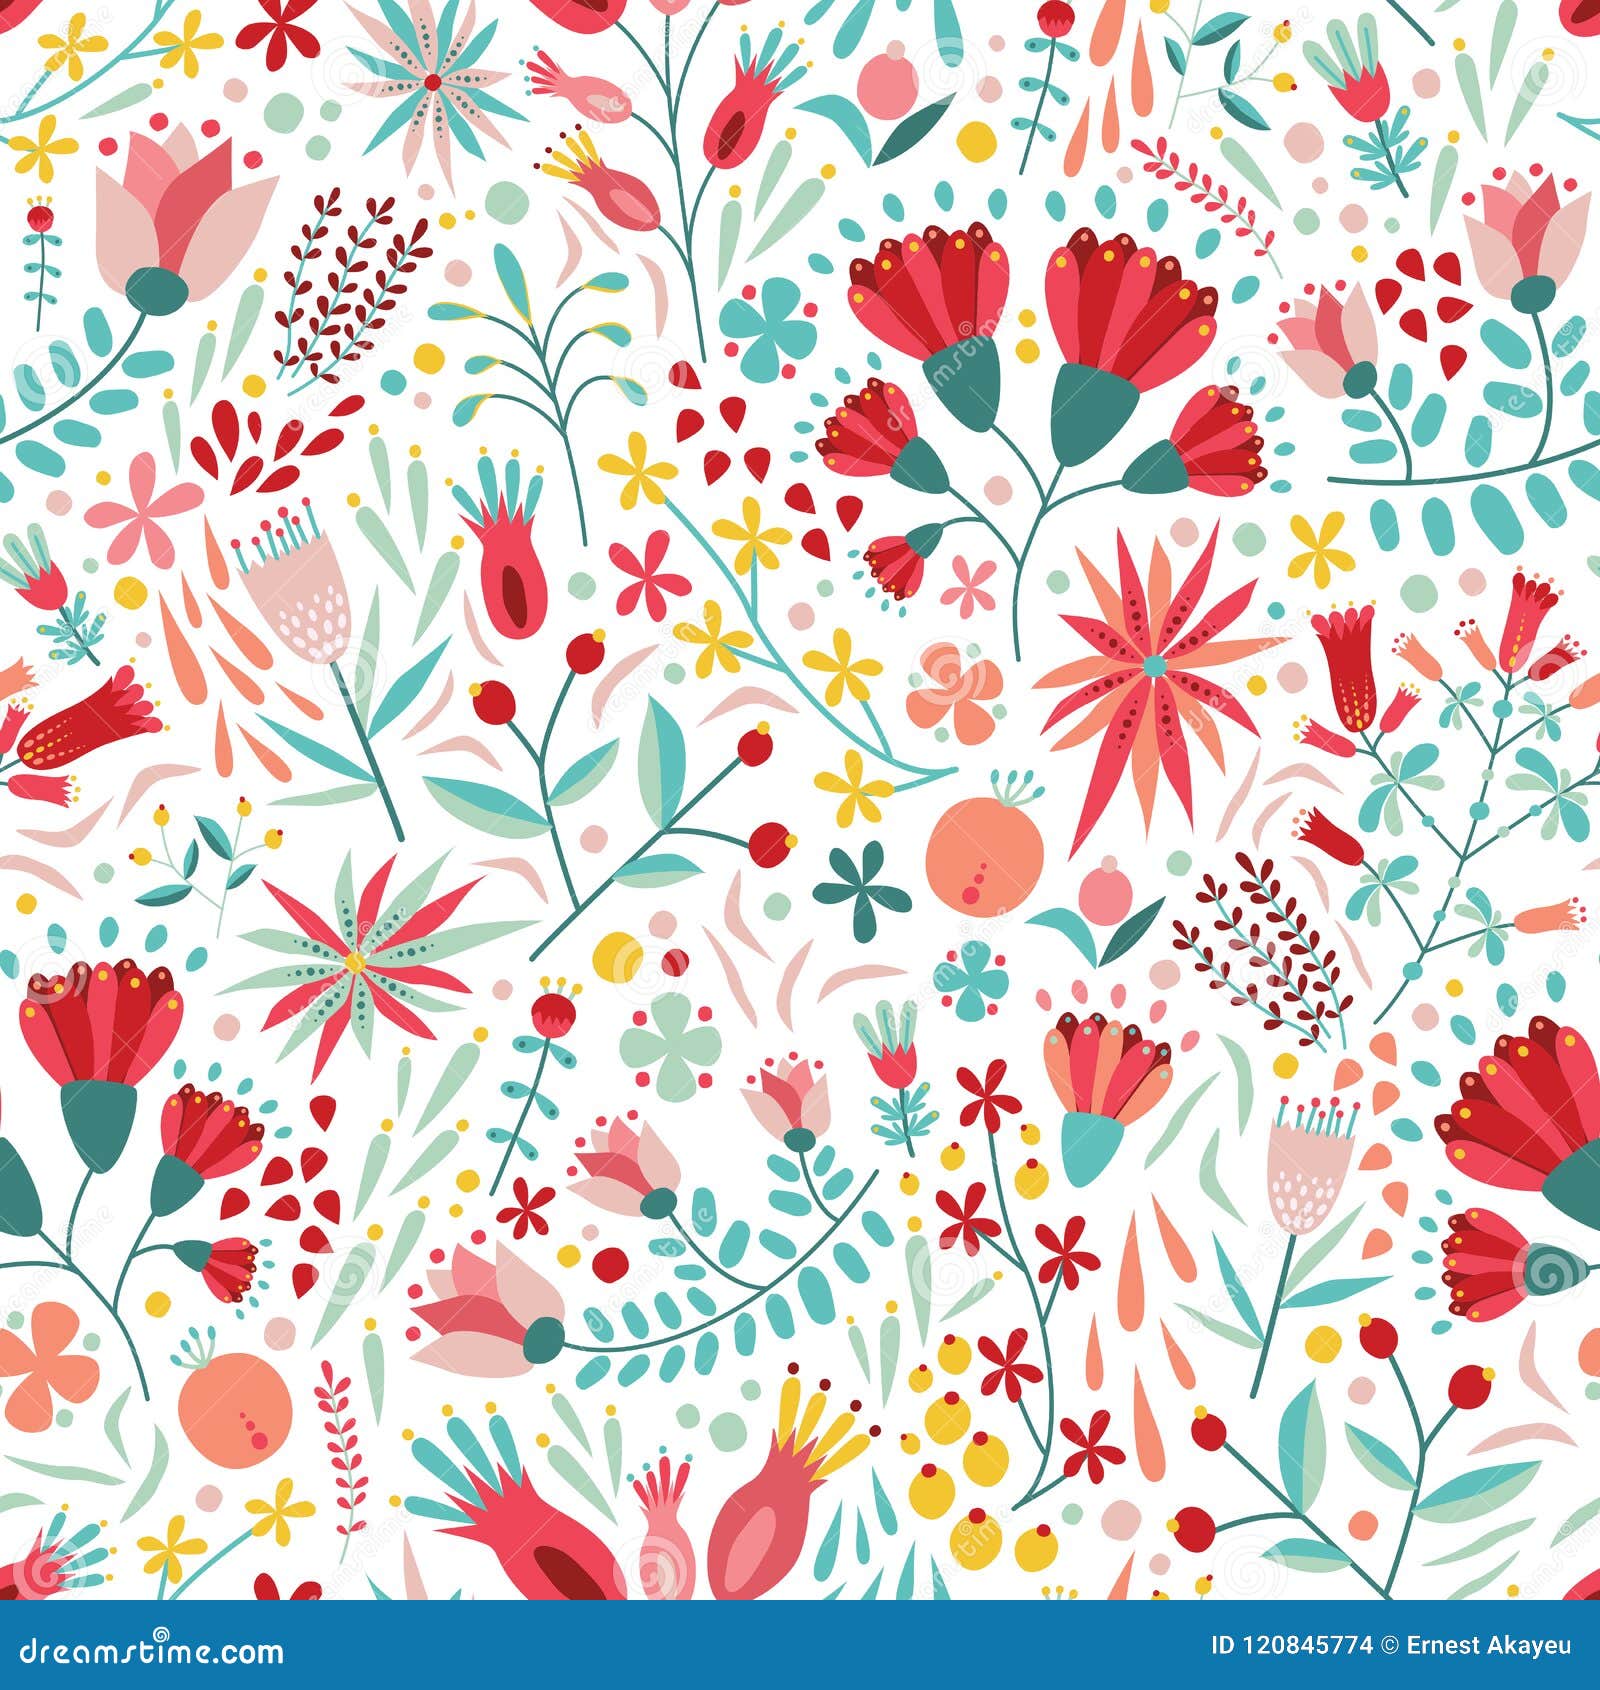 colorful floral seamless pattern with berries, leaves and flowers on white background. decorative botanical backdrop